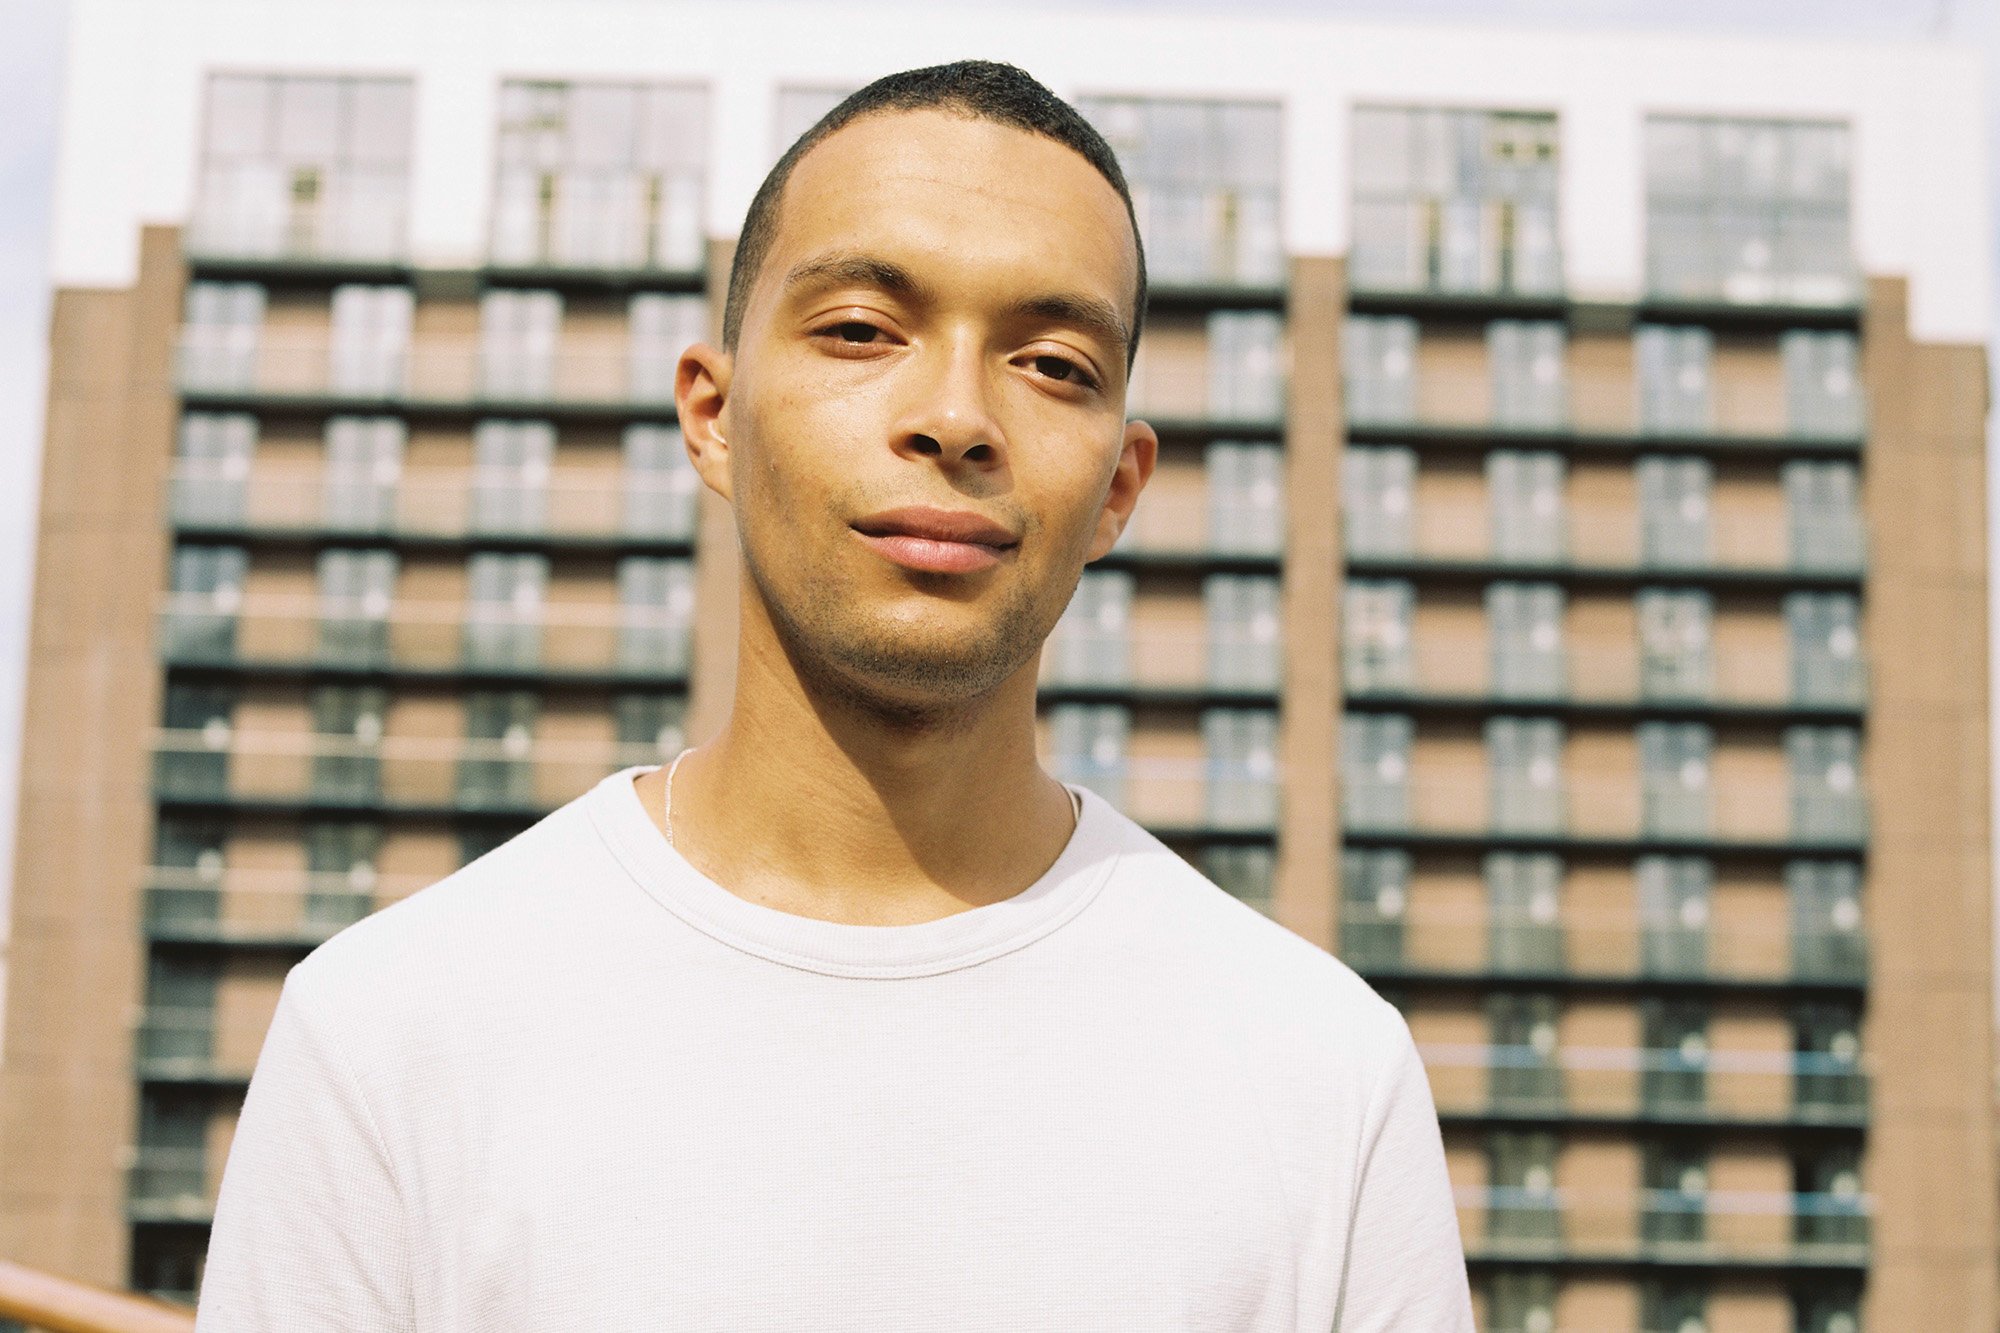 Batu is fanning the flames of Bristol's self-contained sonic revolution